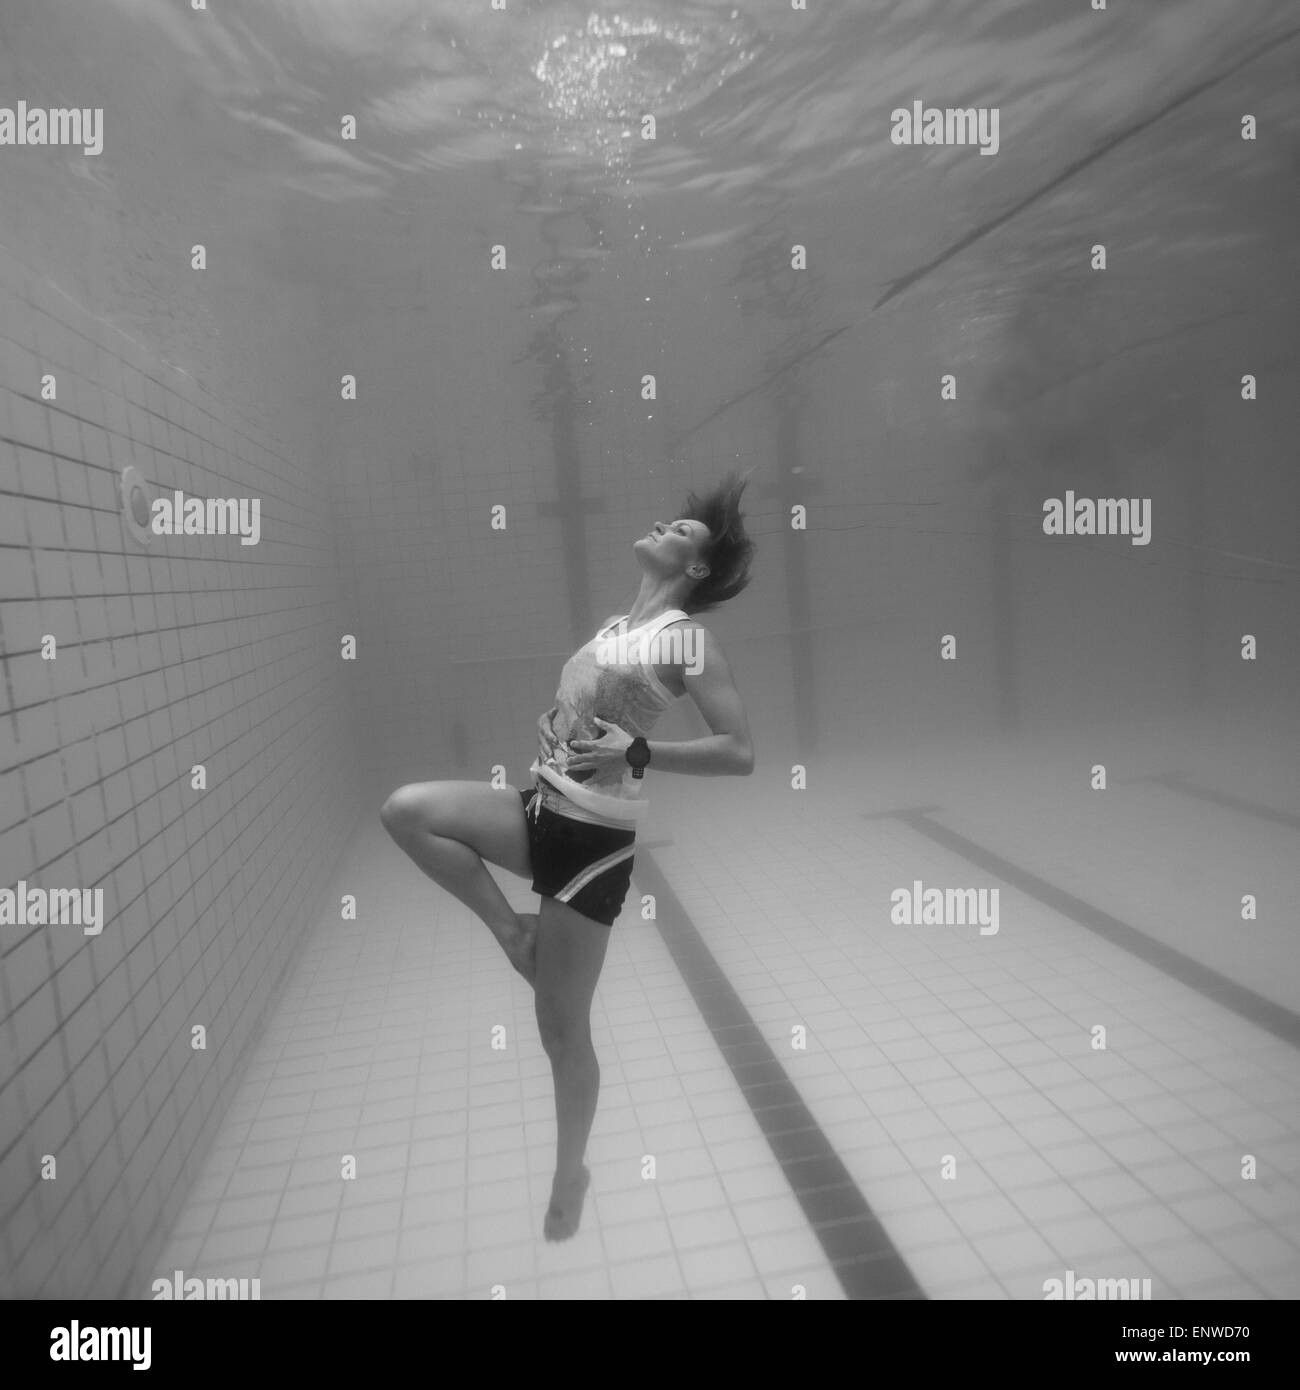 Woman freediving underwater in a pool Stock Photo